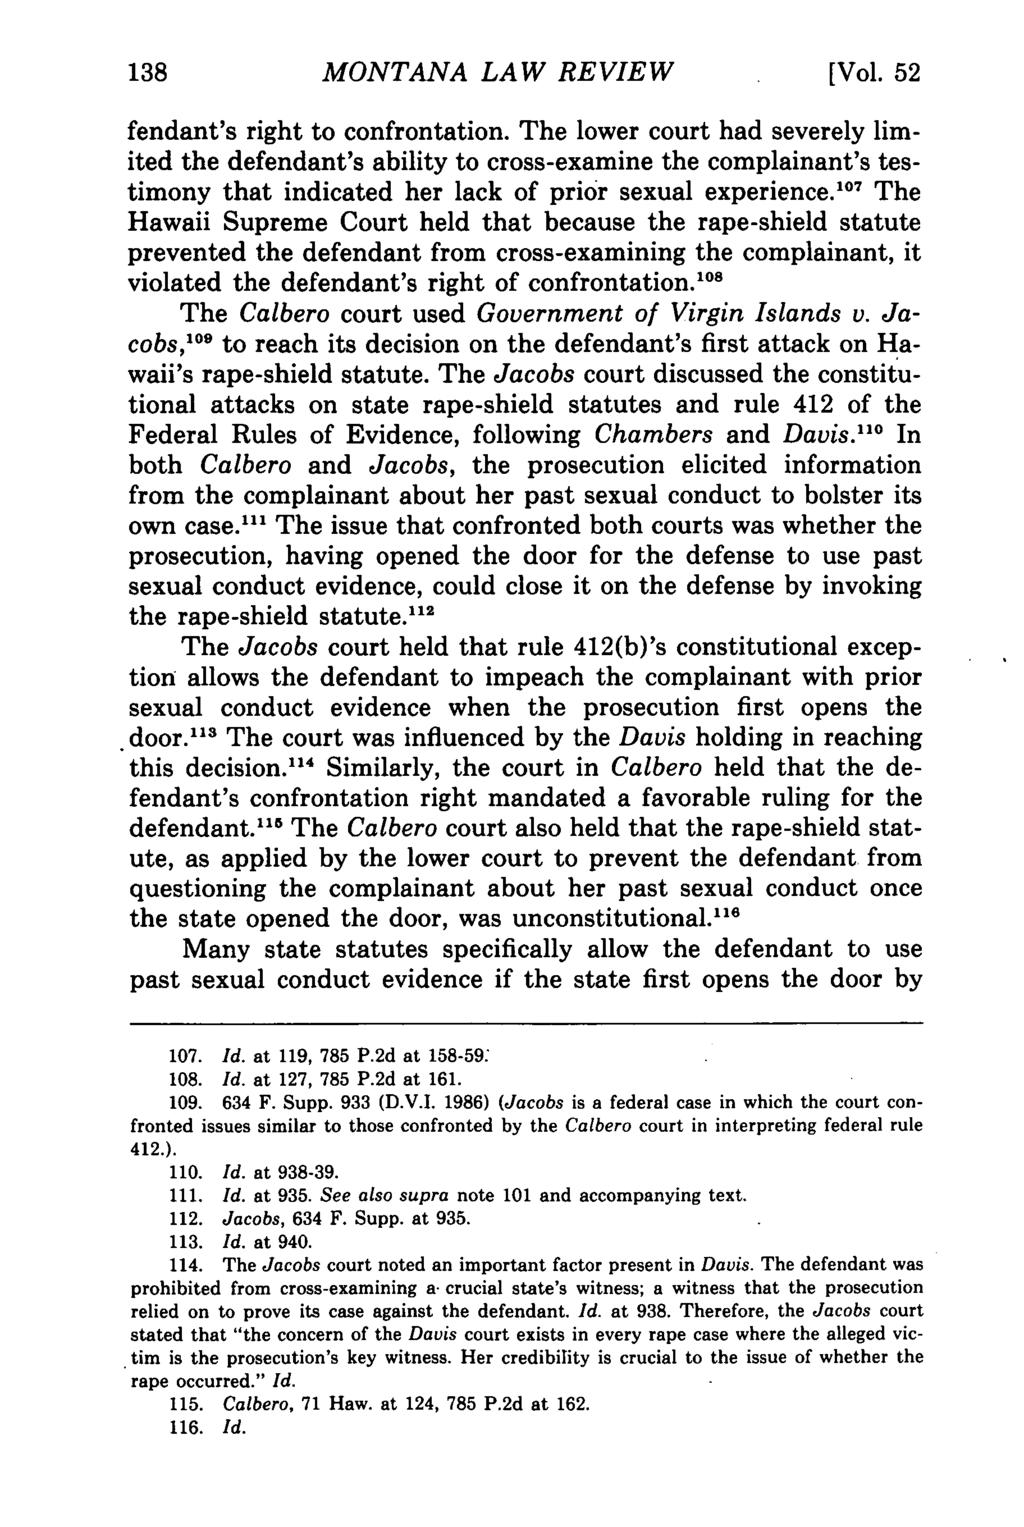 138 Montana Law Review, Vol. 52 [1991], Iss. 1, Art. 8 MONTANA LAW REVIEW [Vol. 52 fendant's right to confrontation.